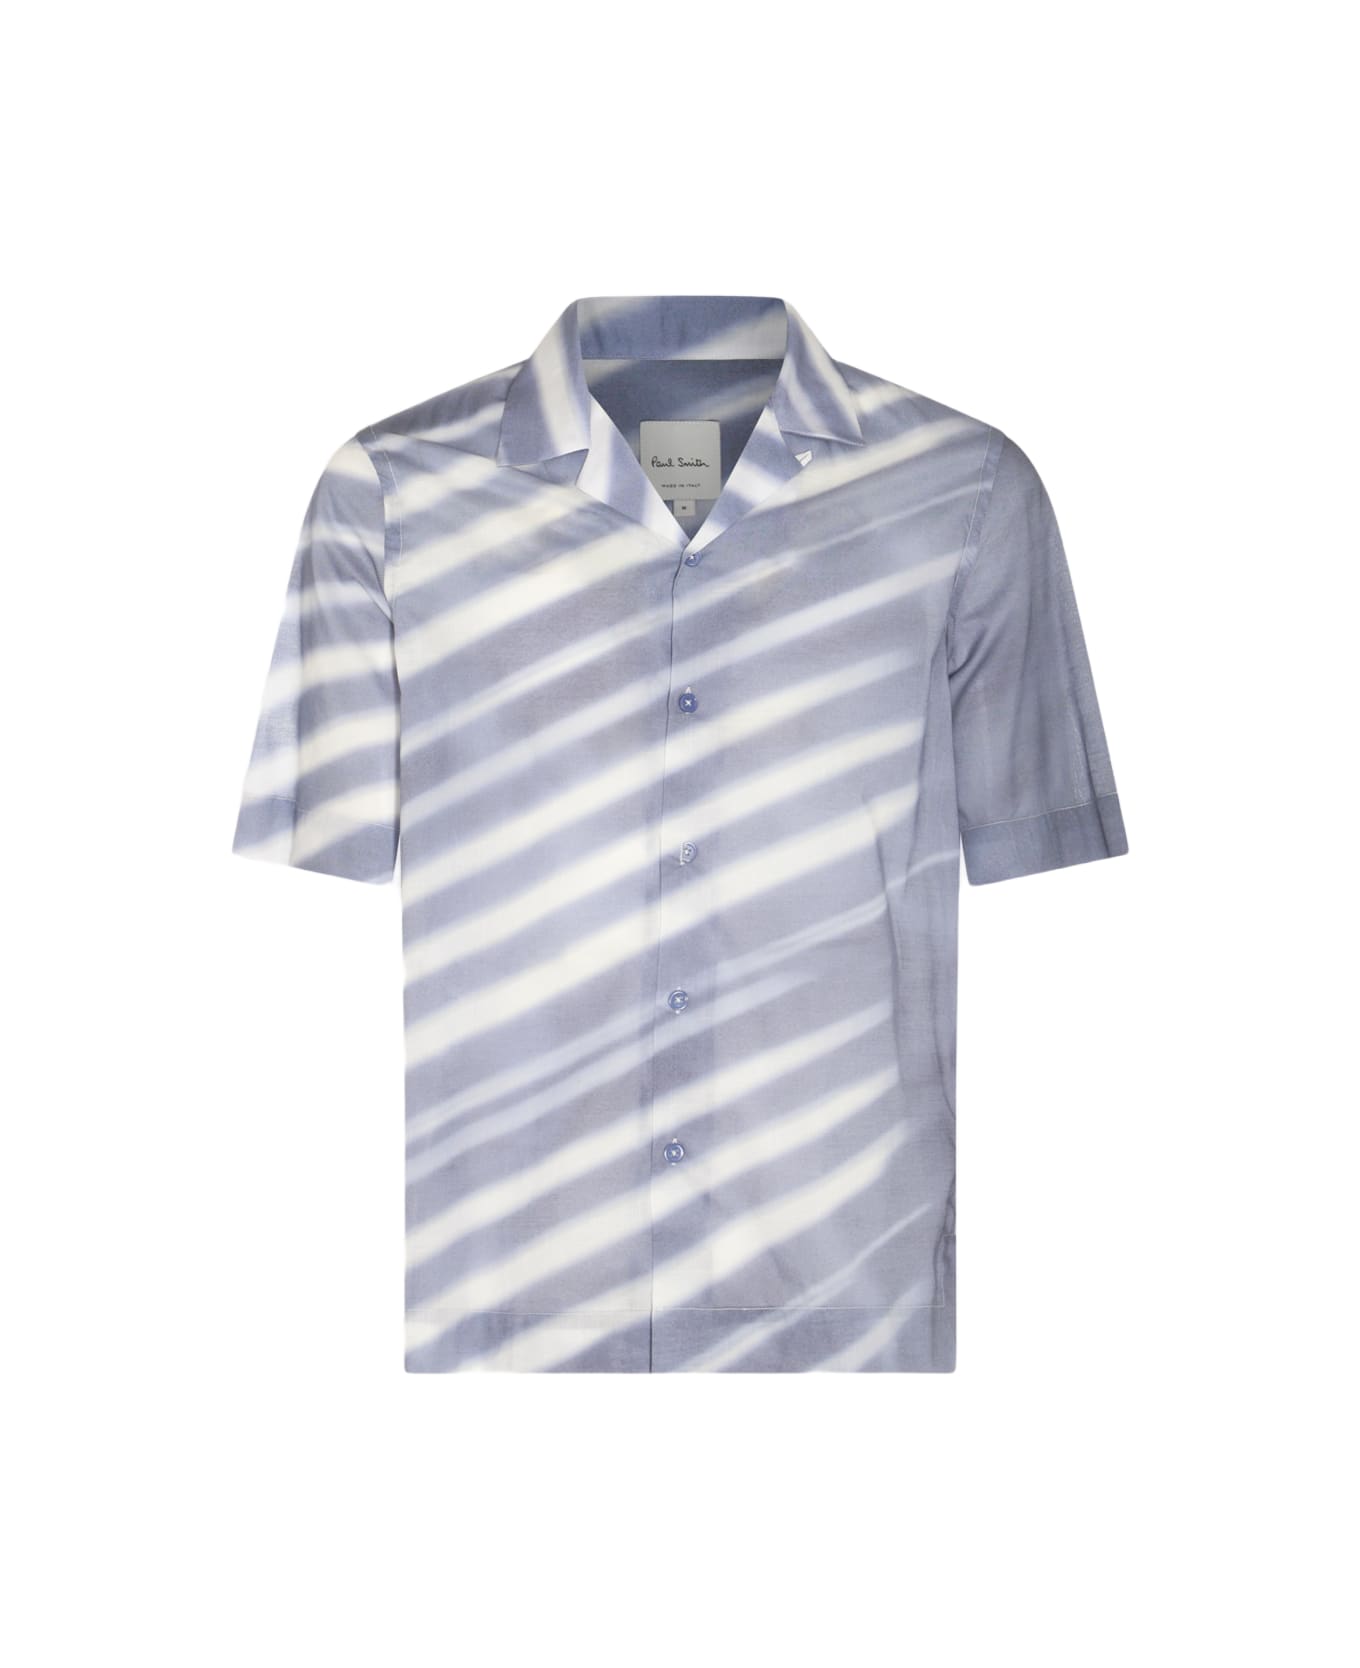 Paul Smith Blue And White Cotton Shirt - Blue シャツ